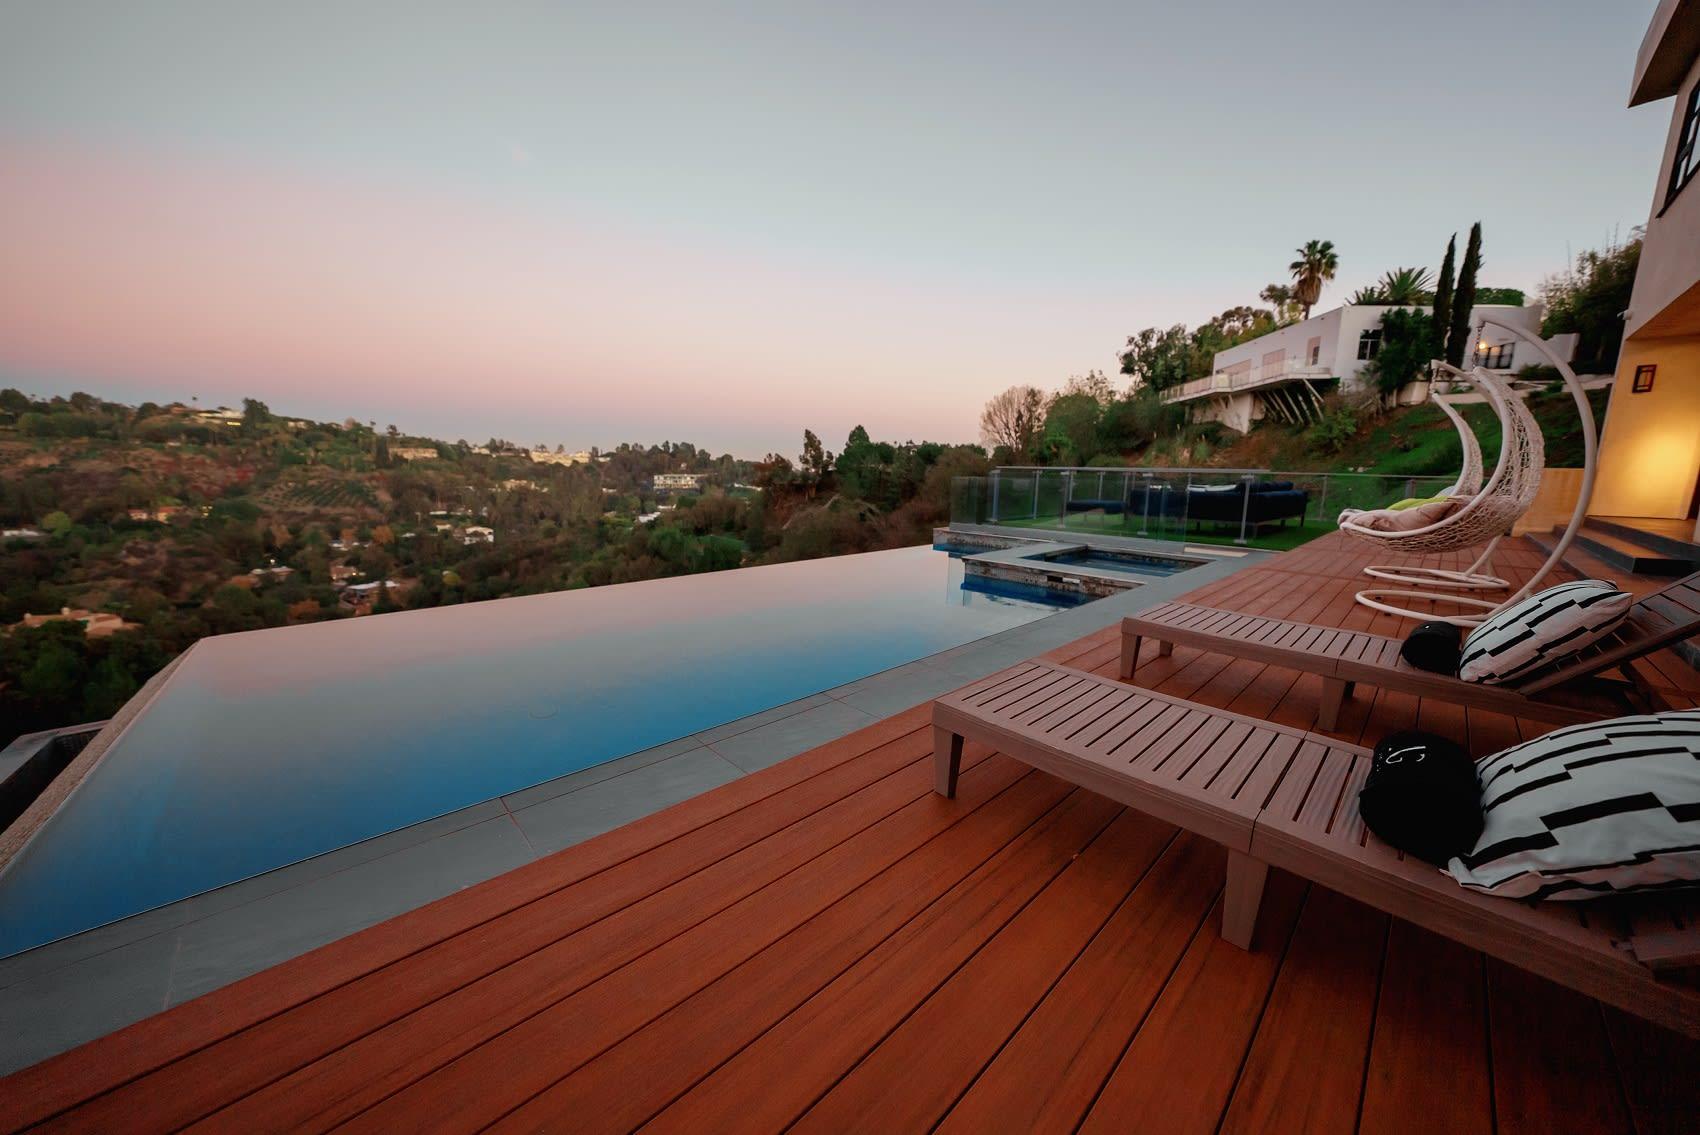 Property Image 1 - Secluded Bel Air Villa With Unobstructed Views